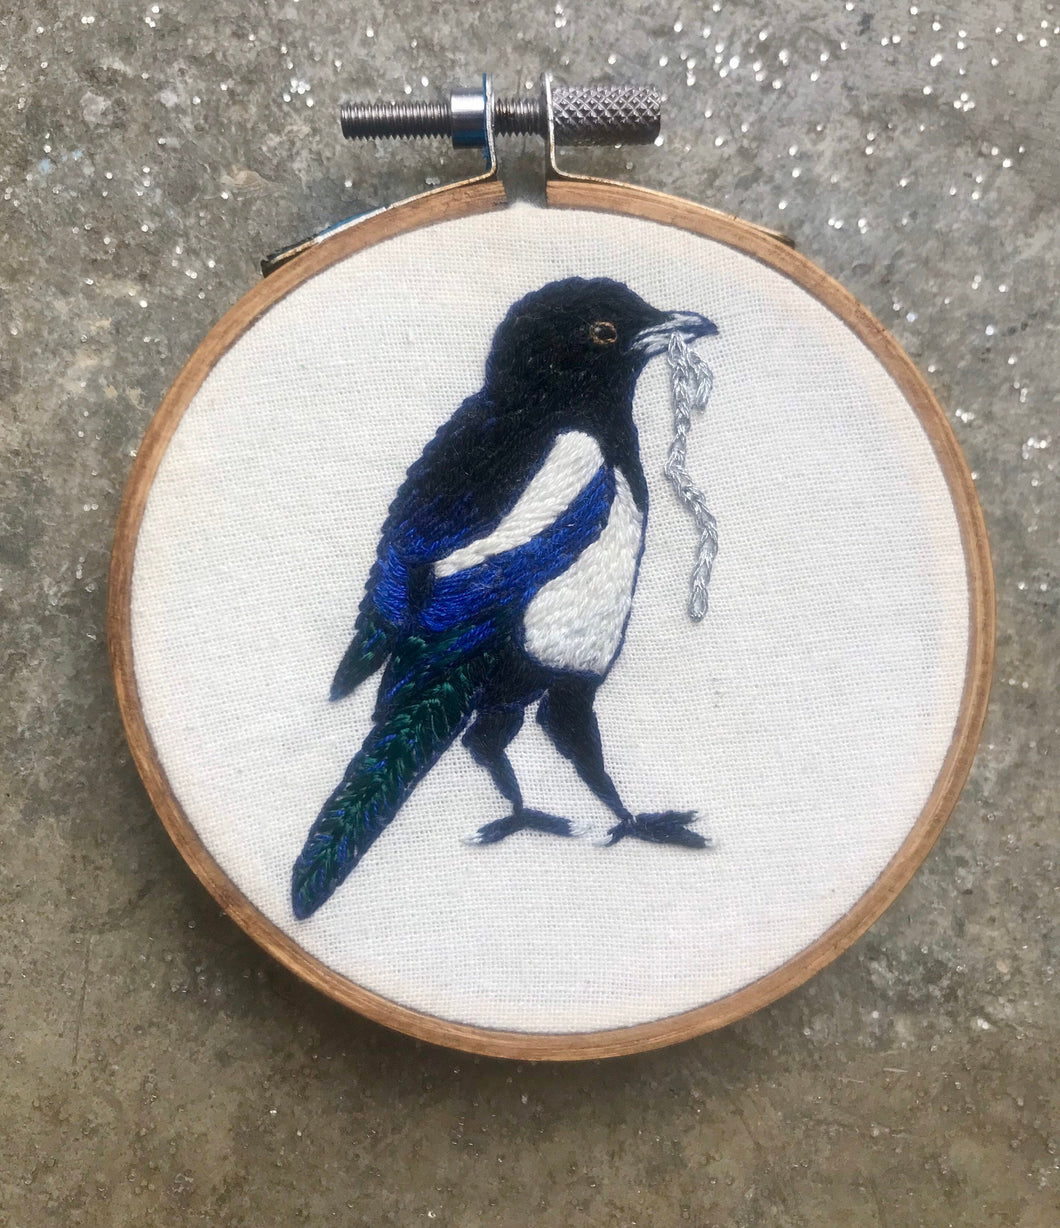 Embroidered Magpie Hoop Art Embroidery, The Thief, Thieving Magpie with Silver chain,  Embroidery Art Small Circular Hoop, Tiny art Corvids